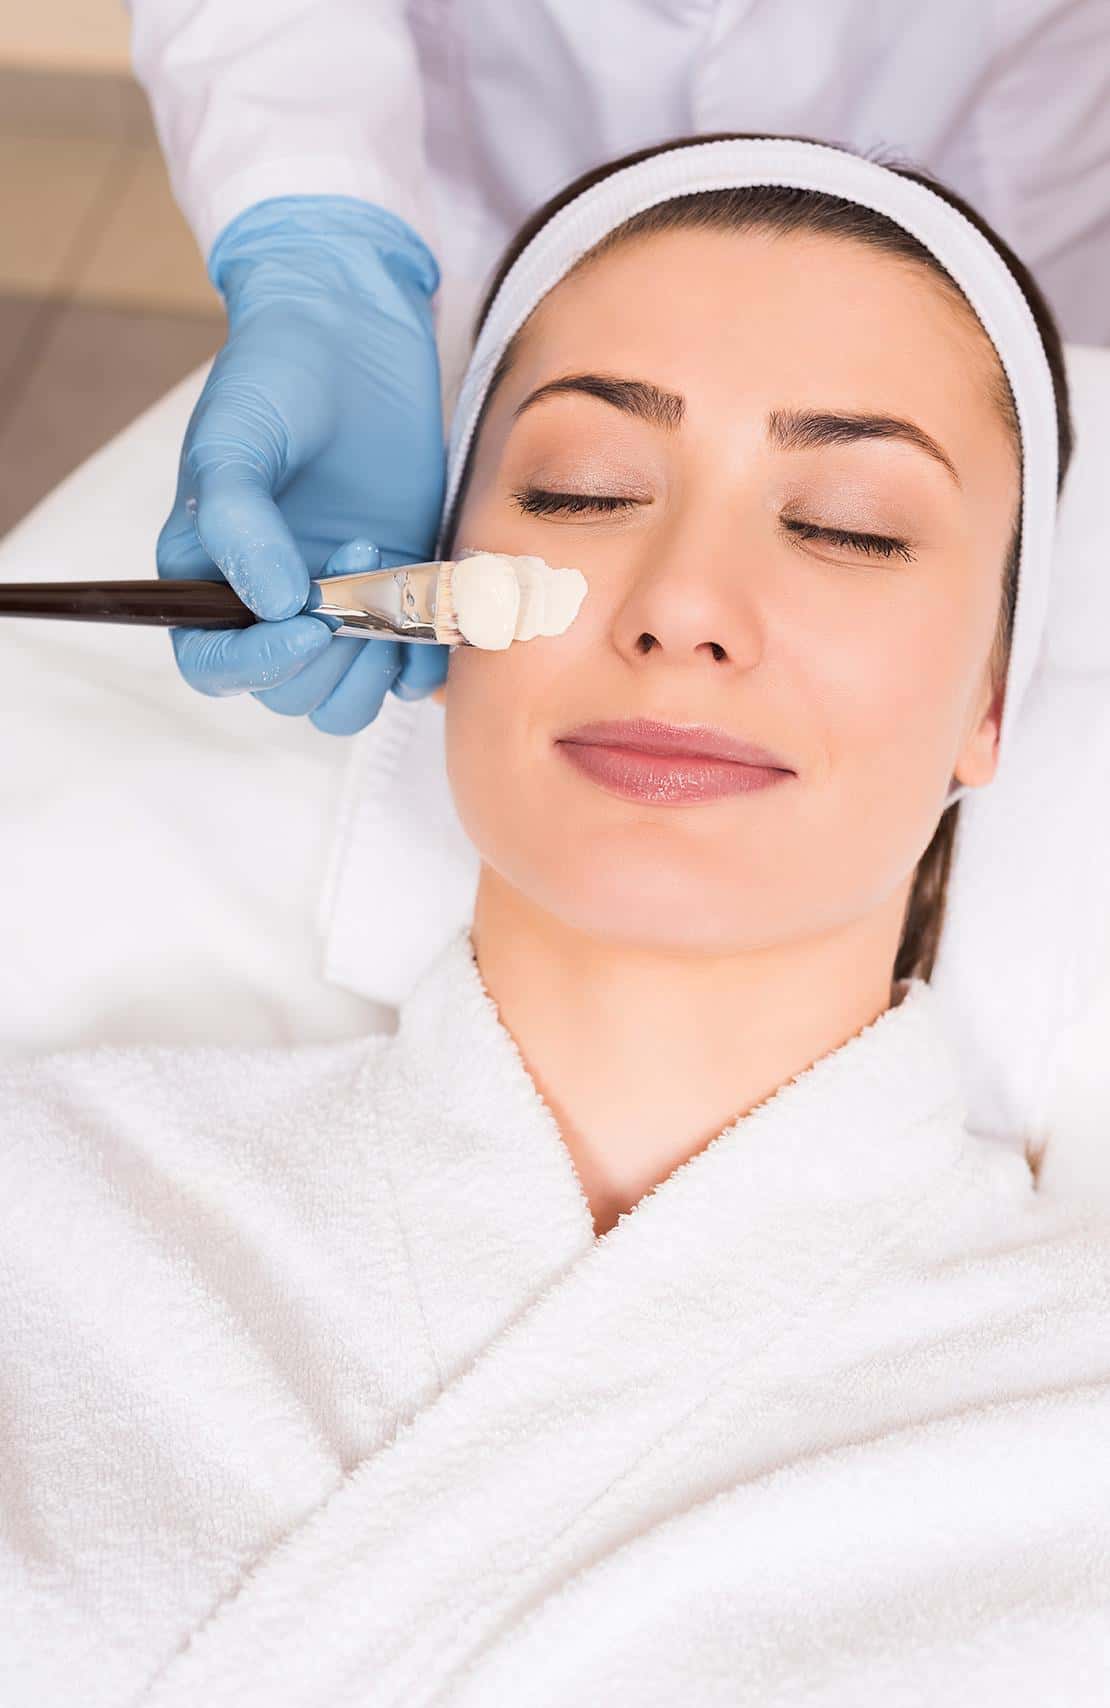 Mobile Facial Treatments In London Fantastic Services